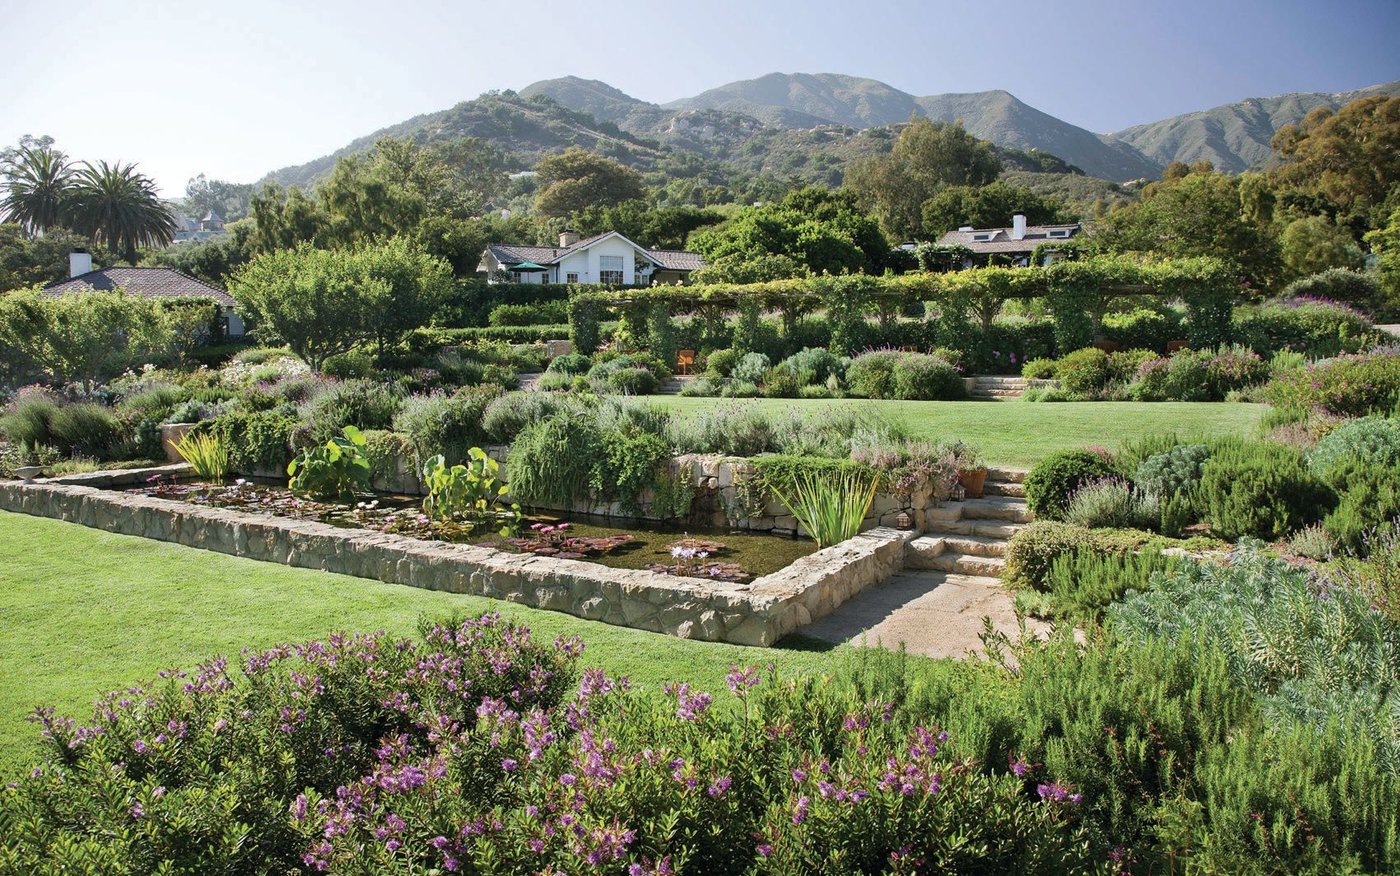 A look at San Ysidro Ranch’s lush grounds, where its 38 cottages are hidden among the foliage. PHOTO COURTESY OF SAN YSIDRO RANCH